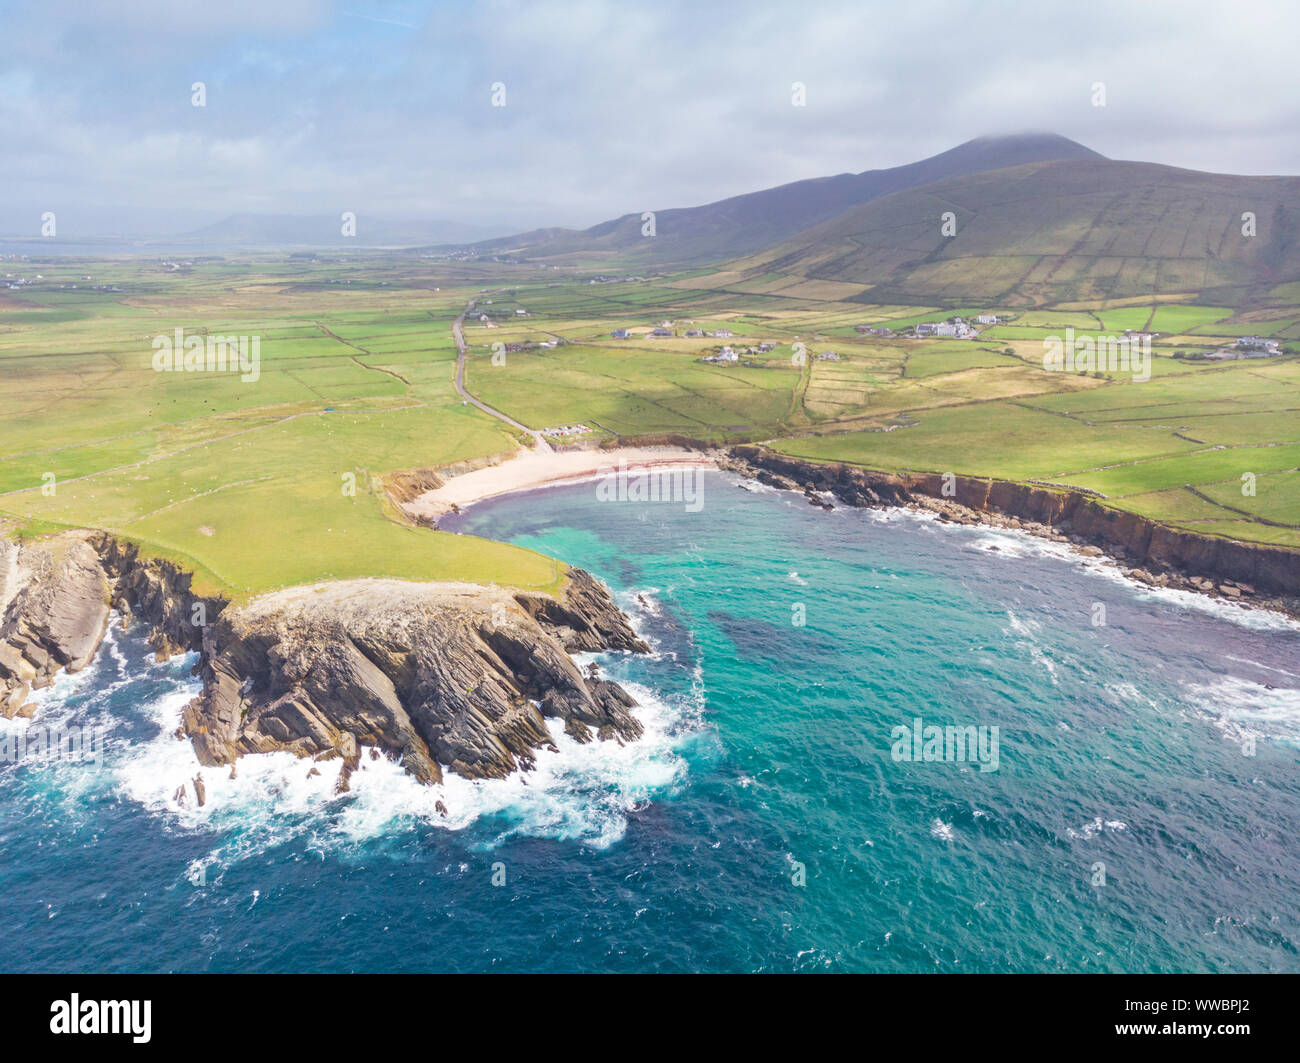 An aerial view of Clogher Strand beach in the Dingle Peninsula, County Kerry Ireland. Stock Photo